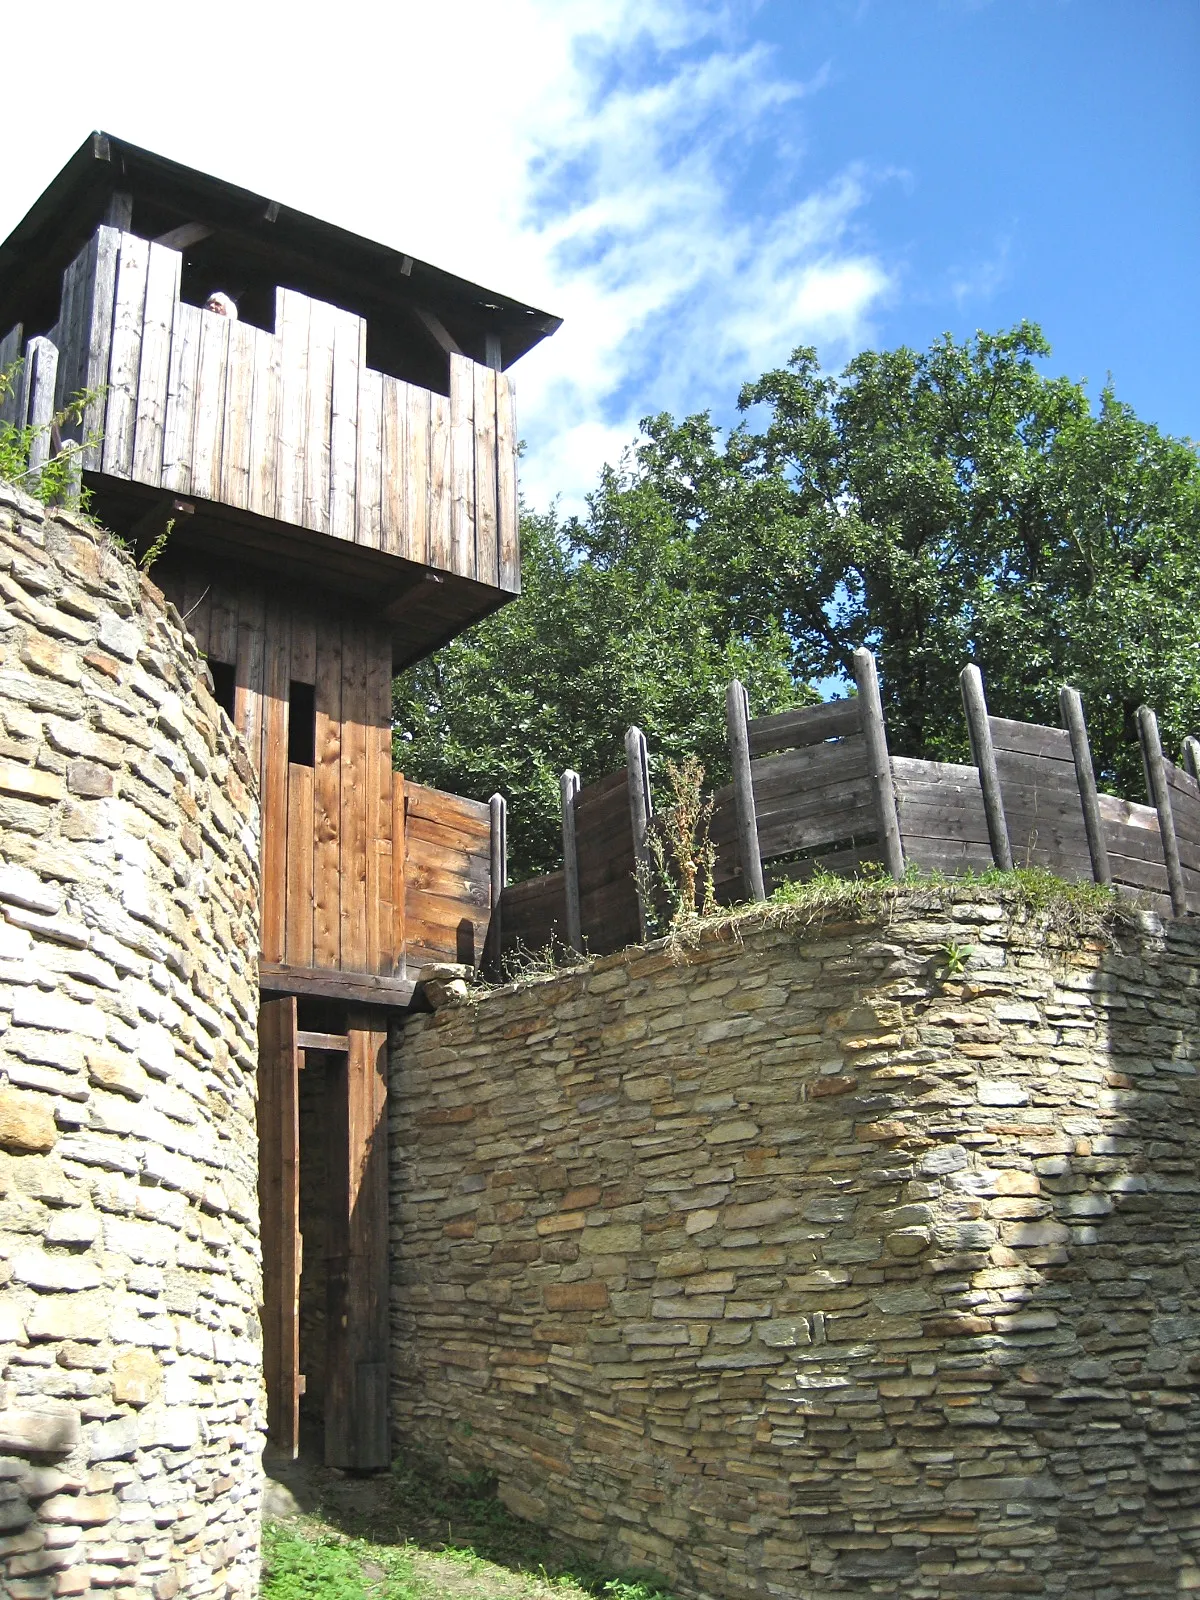 Photo showing: Recontructed Slavic gatehouse- exterior view. Slavic and Late Bronze Age Urnfield site to the west of the river Kamp and Gars am Kamp. This site, excavated in the 1980s by Vienna University, is an extension of the Greater Moravian Empire into what was to become Austria in the 7th and 8th centuries. Some of the banks (“Schanzberg”) on the site are Late Bronze Age (1050-800 BC) and seem to have been incoporated into the later defences. The gatehouse of the Slavic settlement and its box Ramparts have been reconstructed.